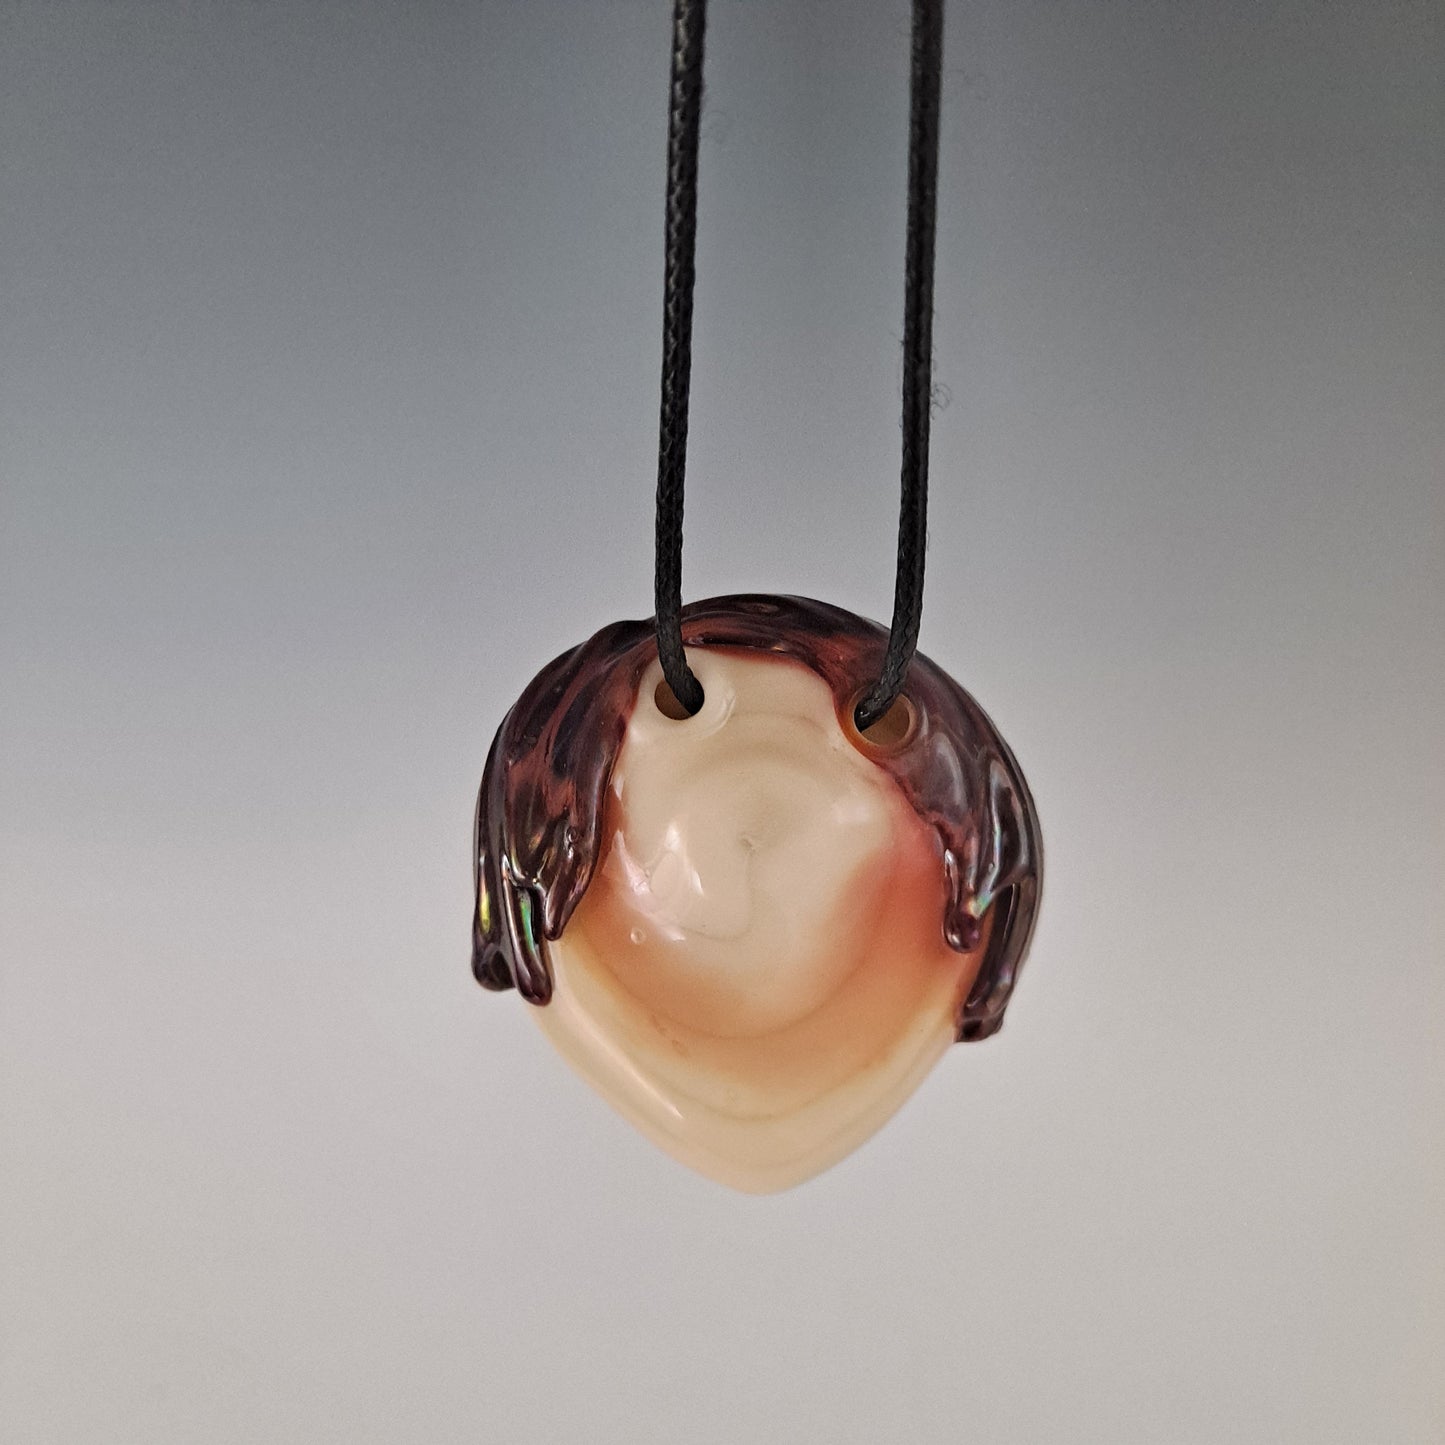 Limited Edition Big Eyed Girl Blown Glass Face Pendant 0206 - Handcrafted Necklace